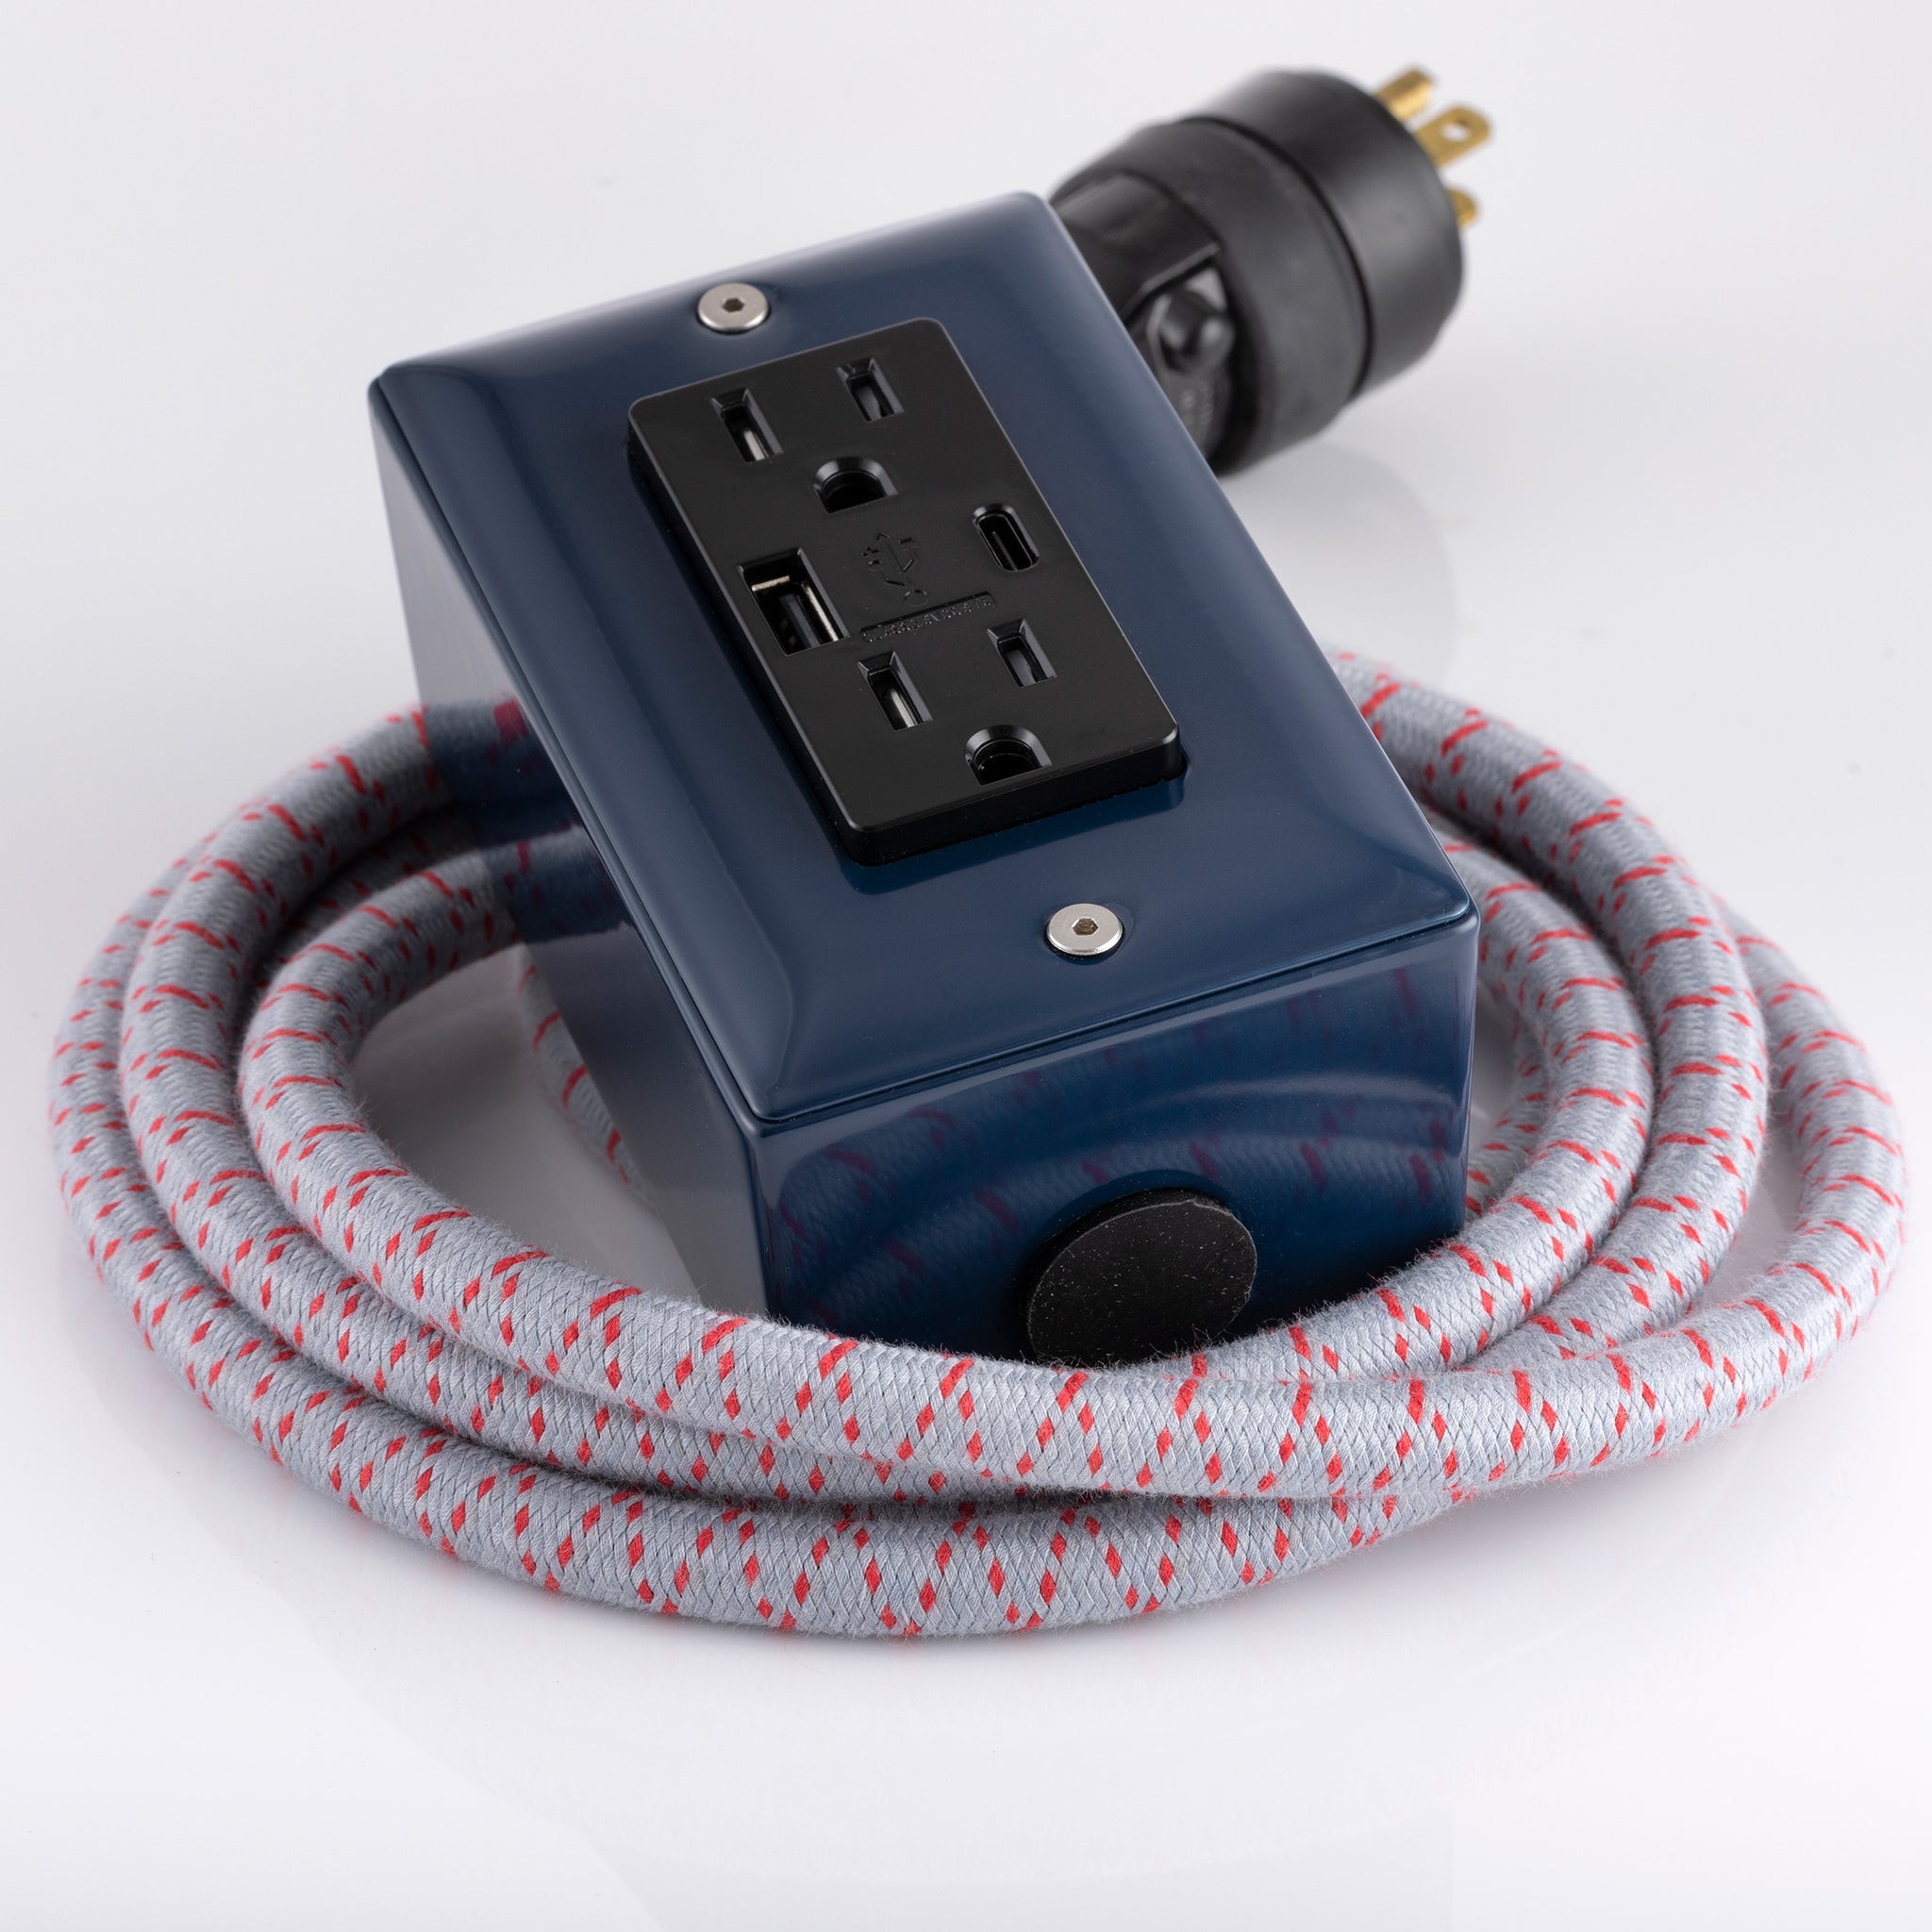 New! The First Smart Chip USB Type C® Navy Blue Extension Cord - 8' Extō USBA/USBC Port, Dual-Outlet Power Cord